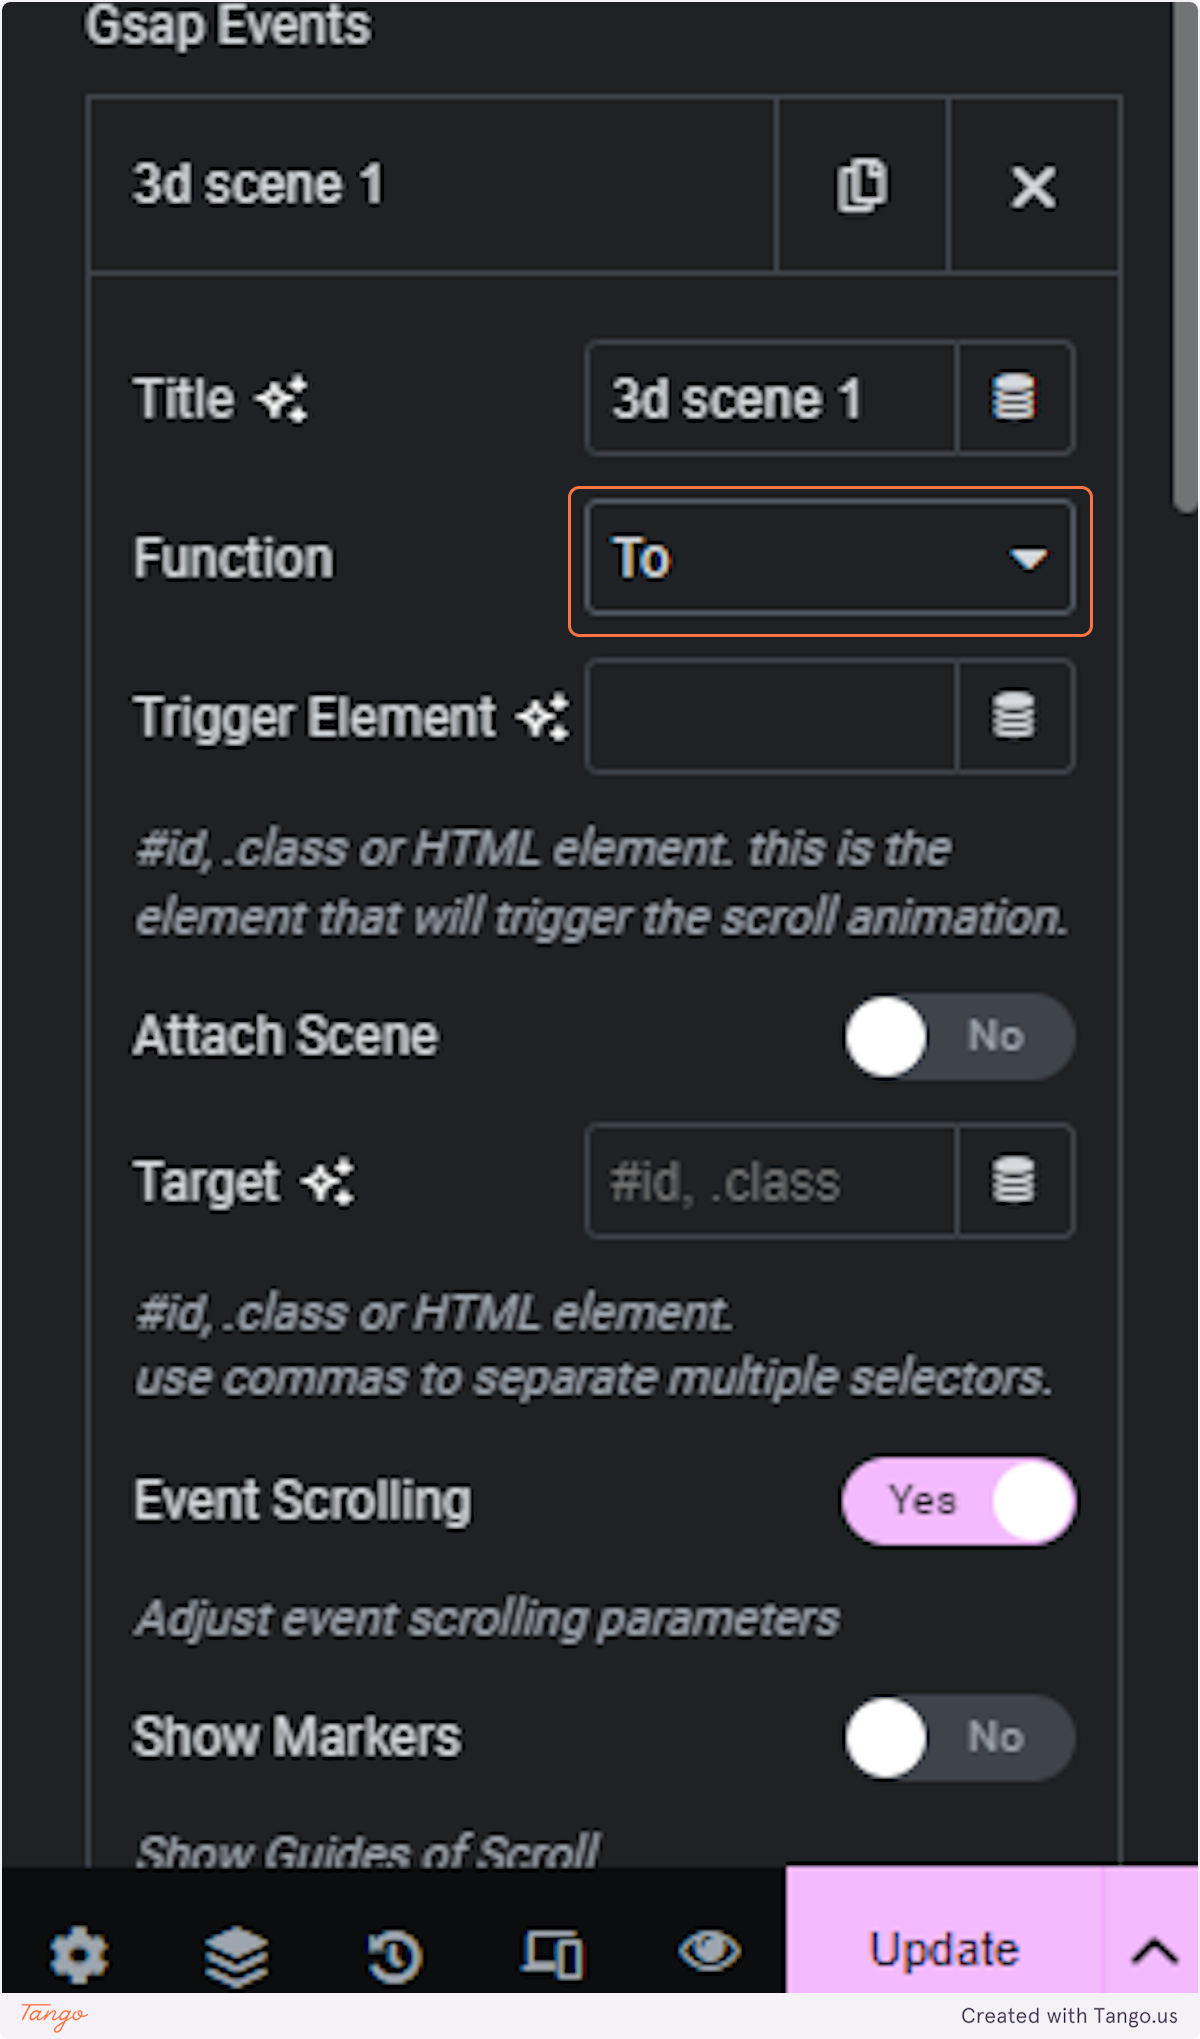 Select To from Function